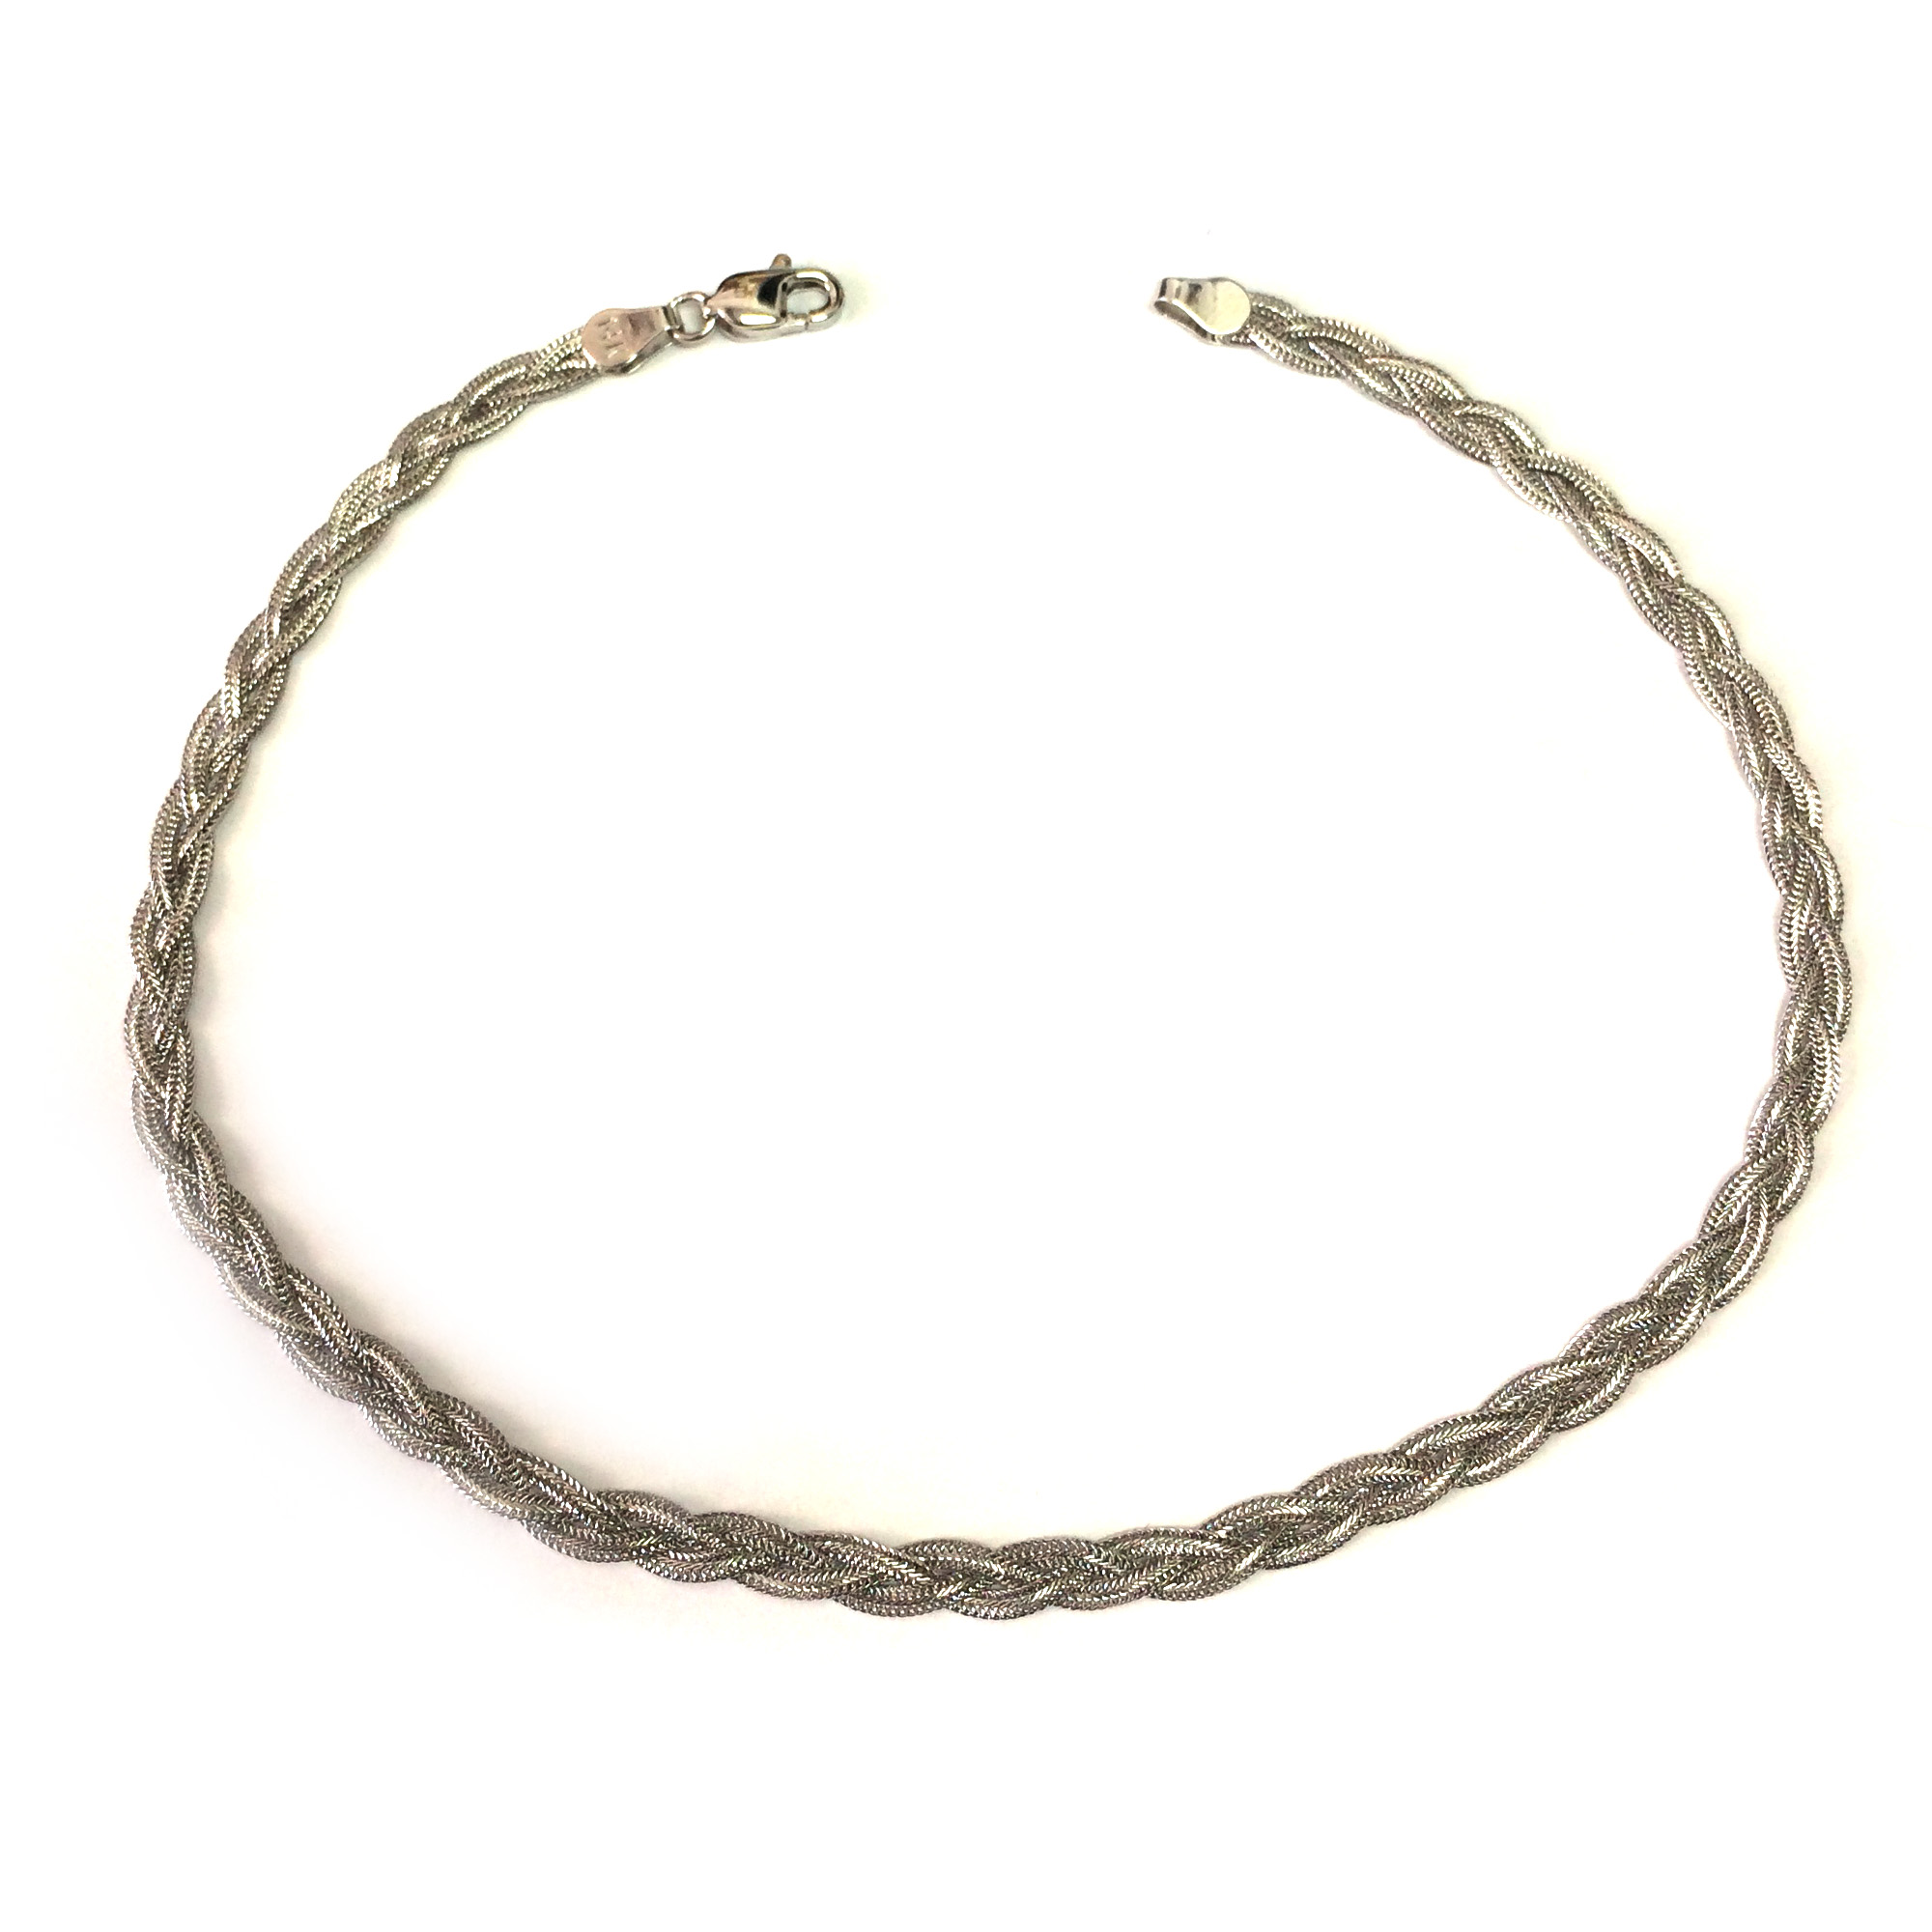 Jewelry Affairs 14K White Gold Braided Fox Chain Anklet, 10"